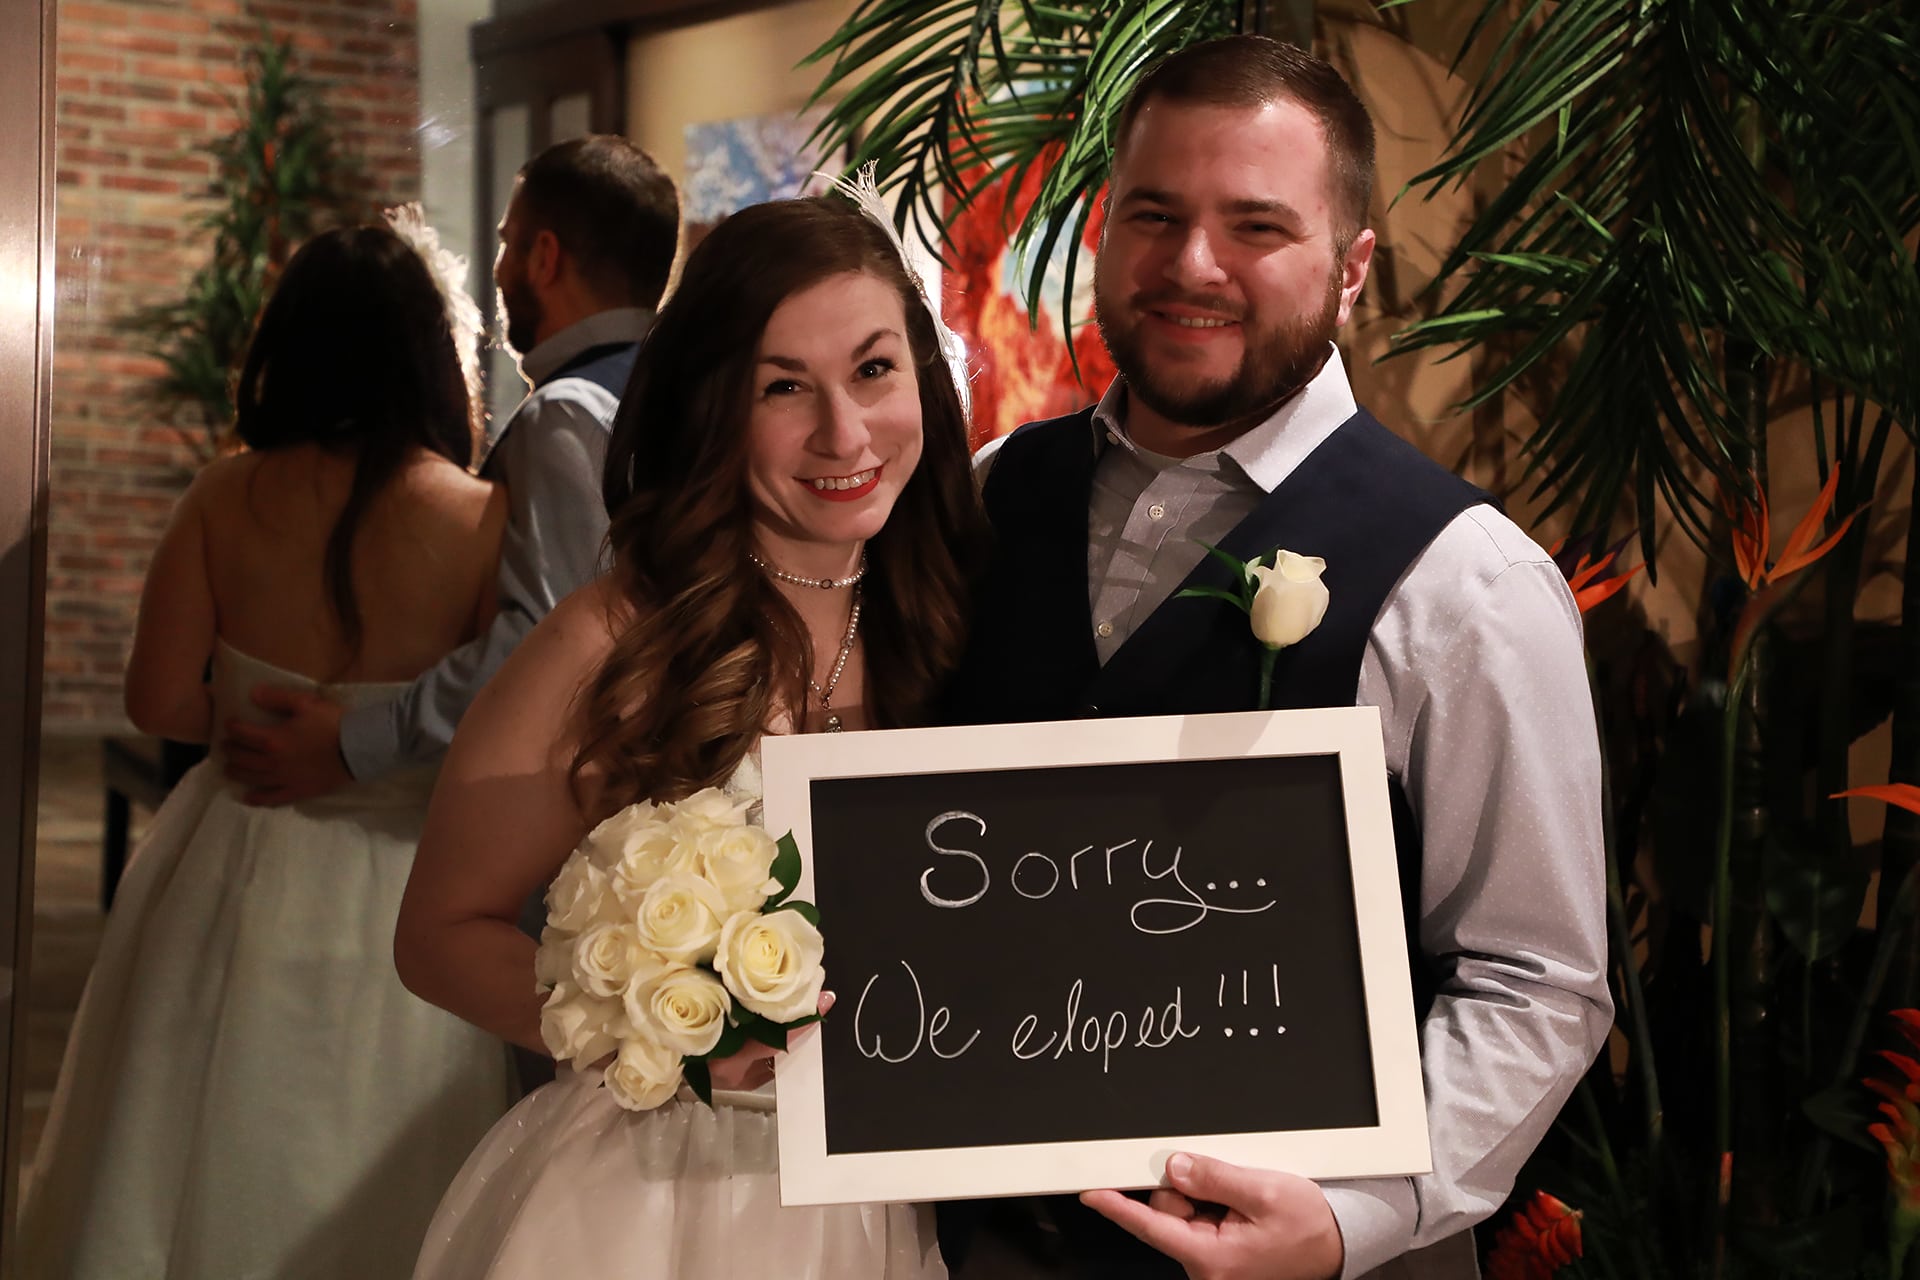 A bride and groom holding a sign.